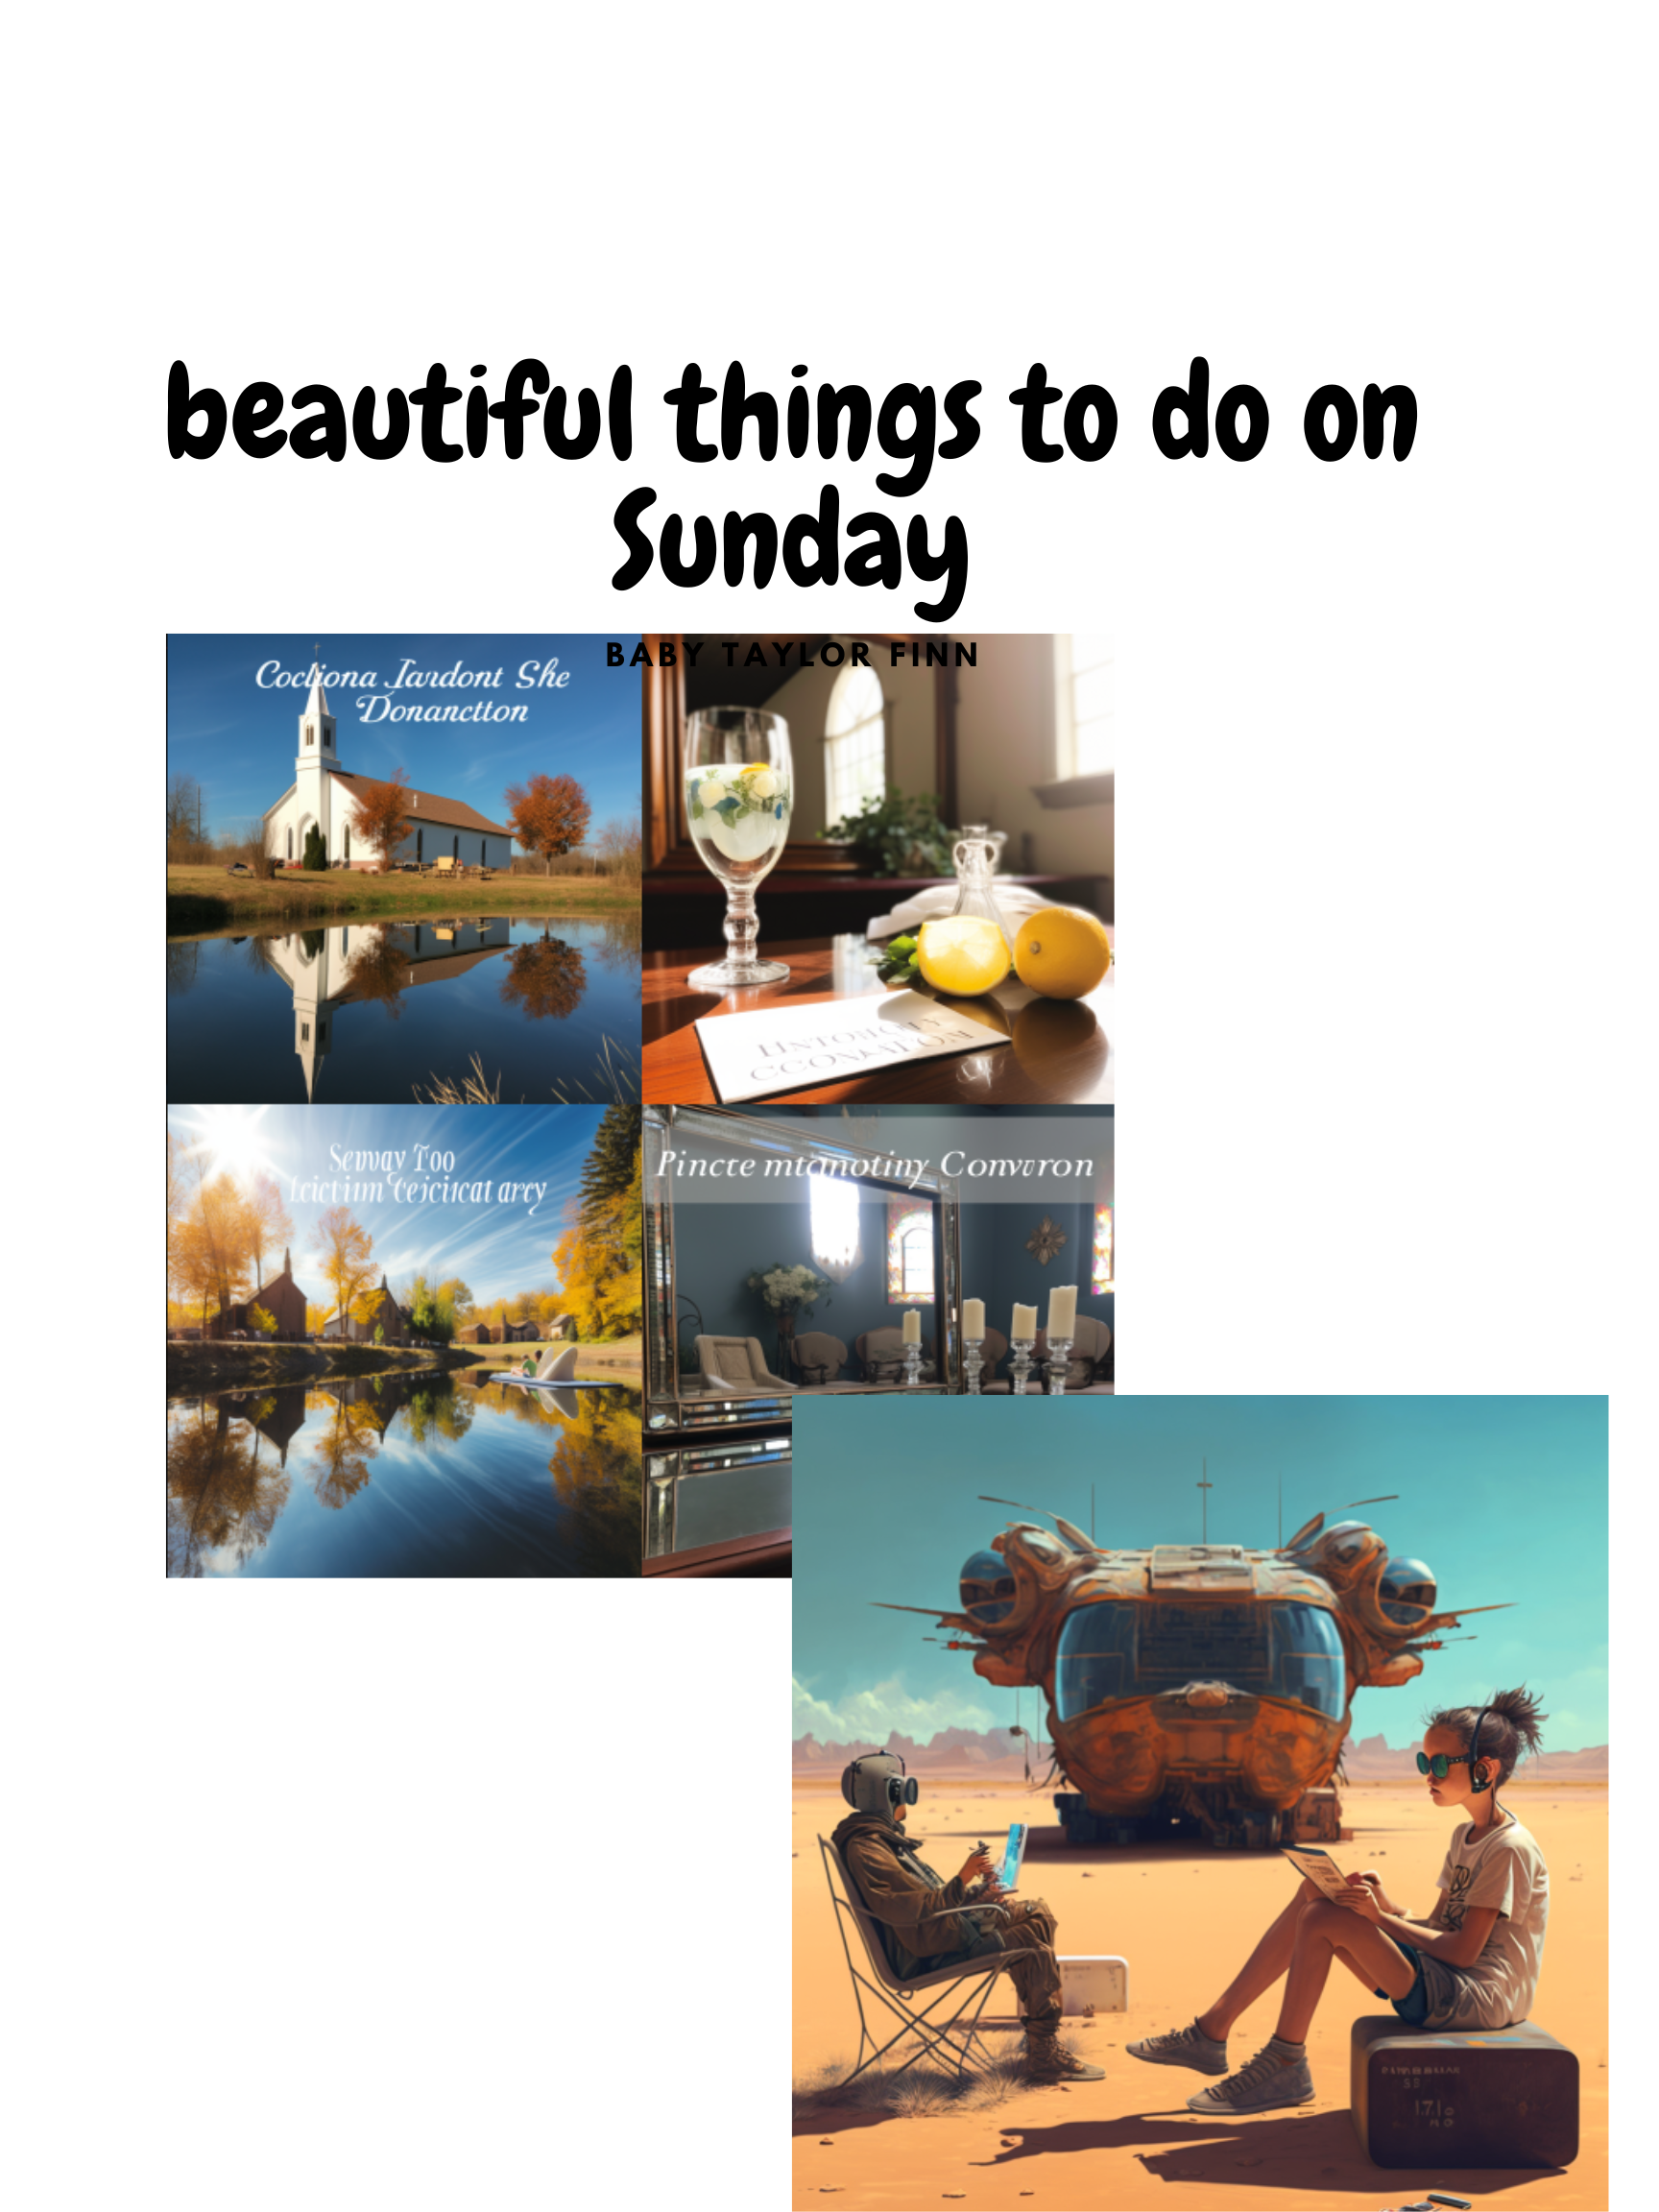 Best things to do during Sunday